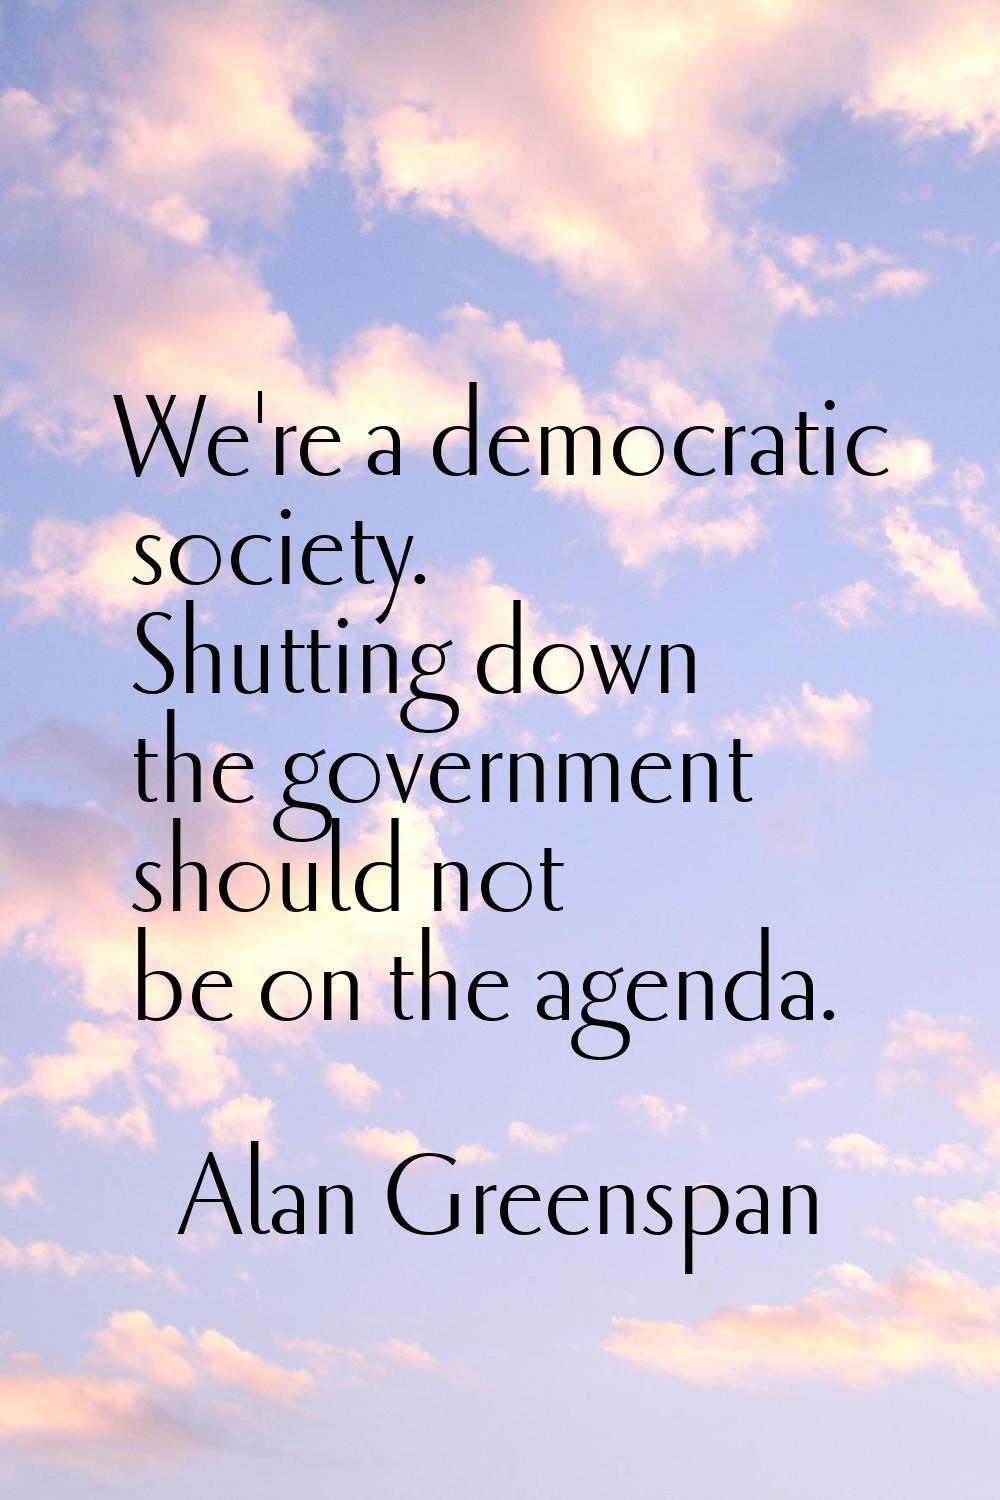 We're a democratic society. Shutting down the government should not be on the agenda.